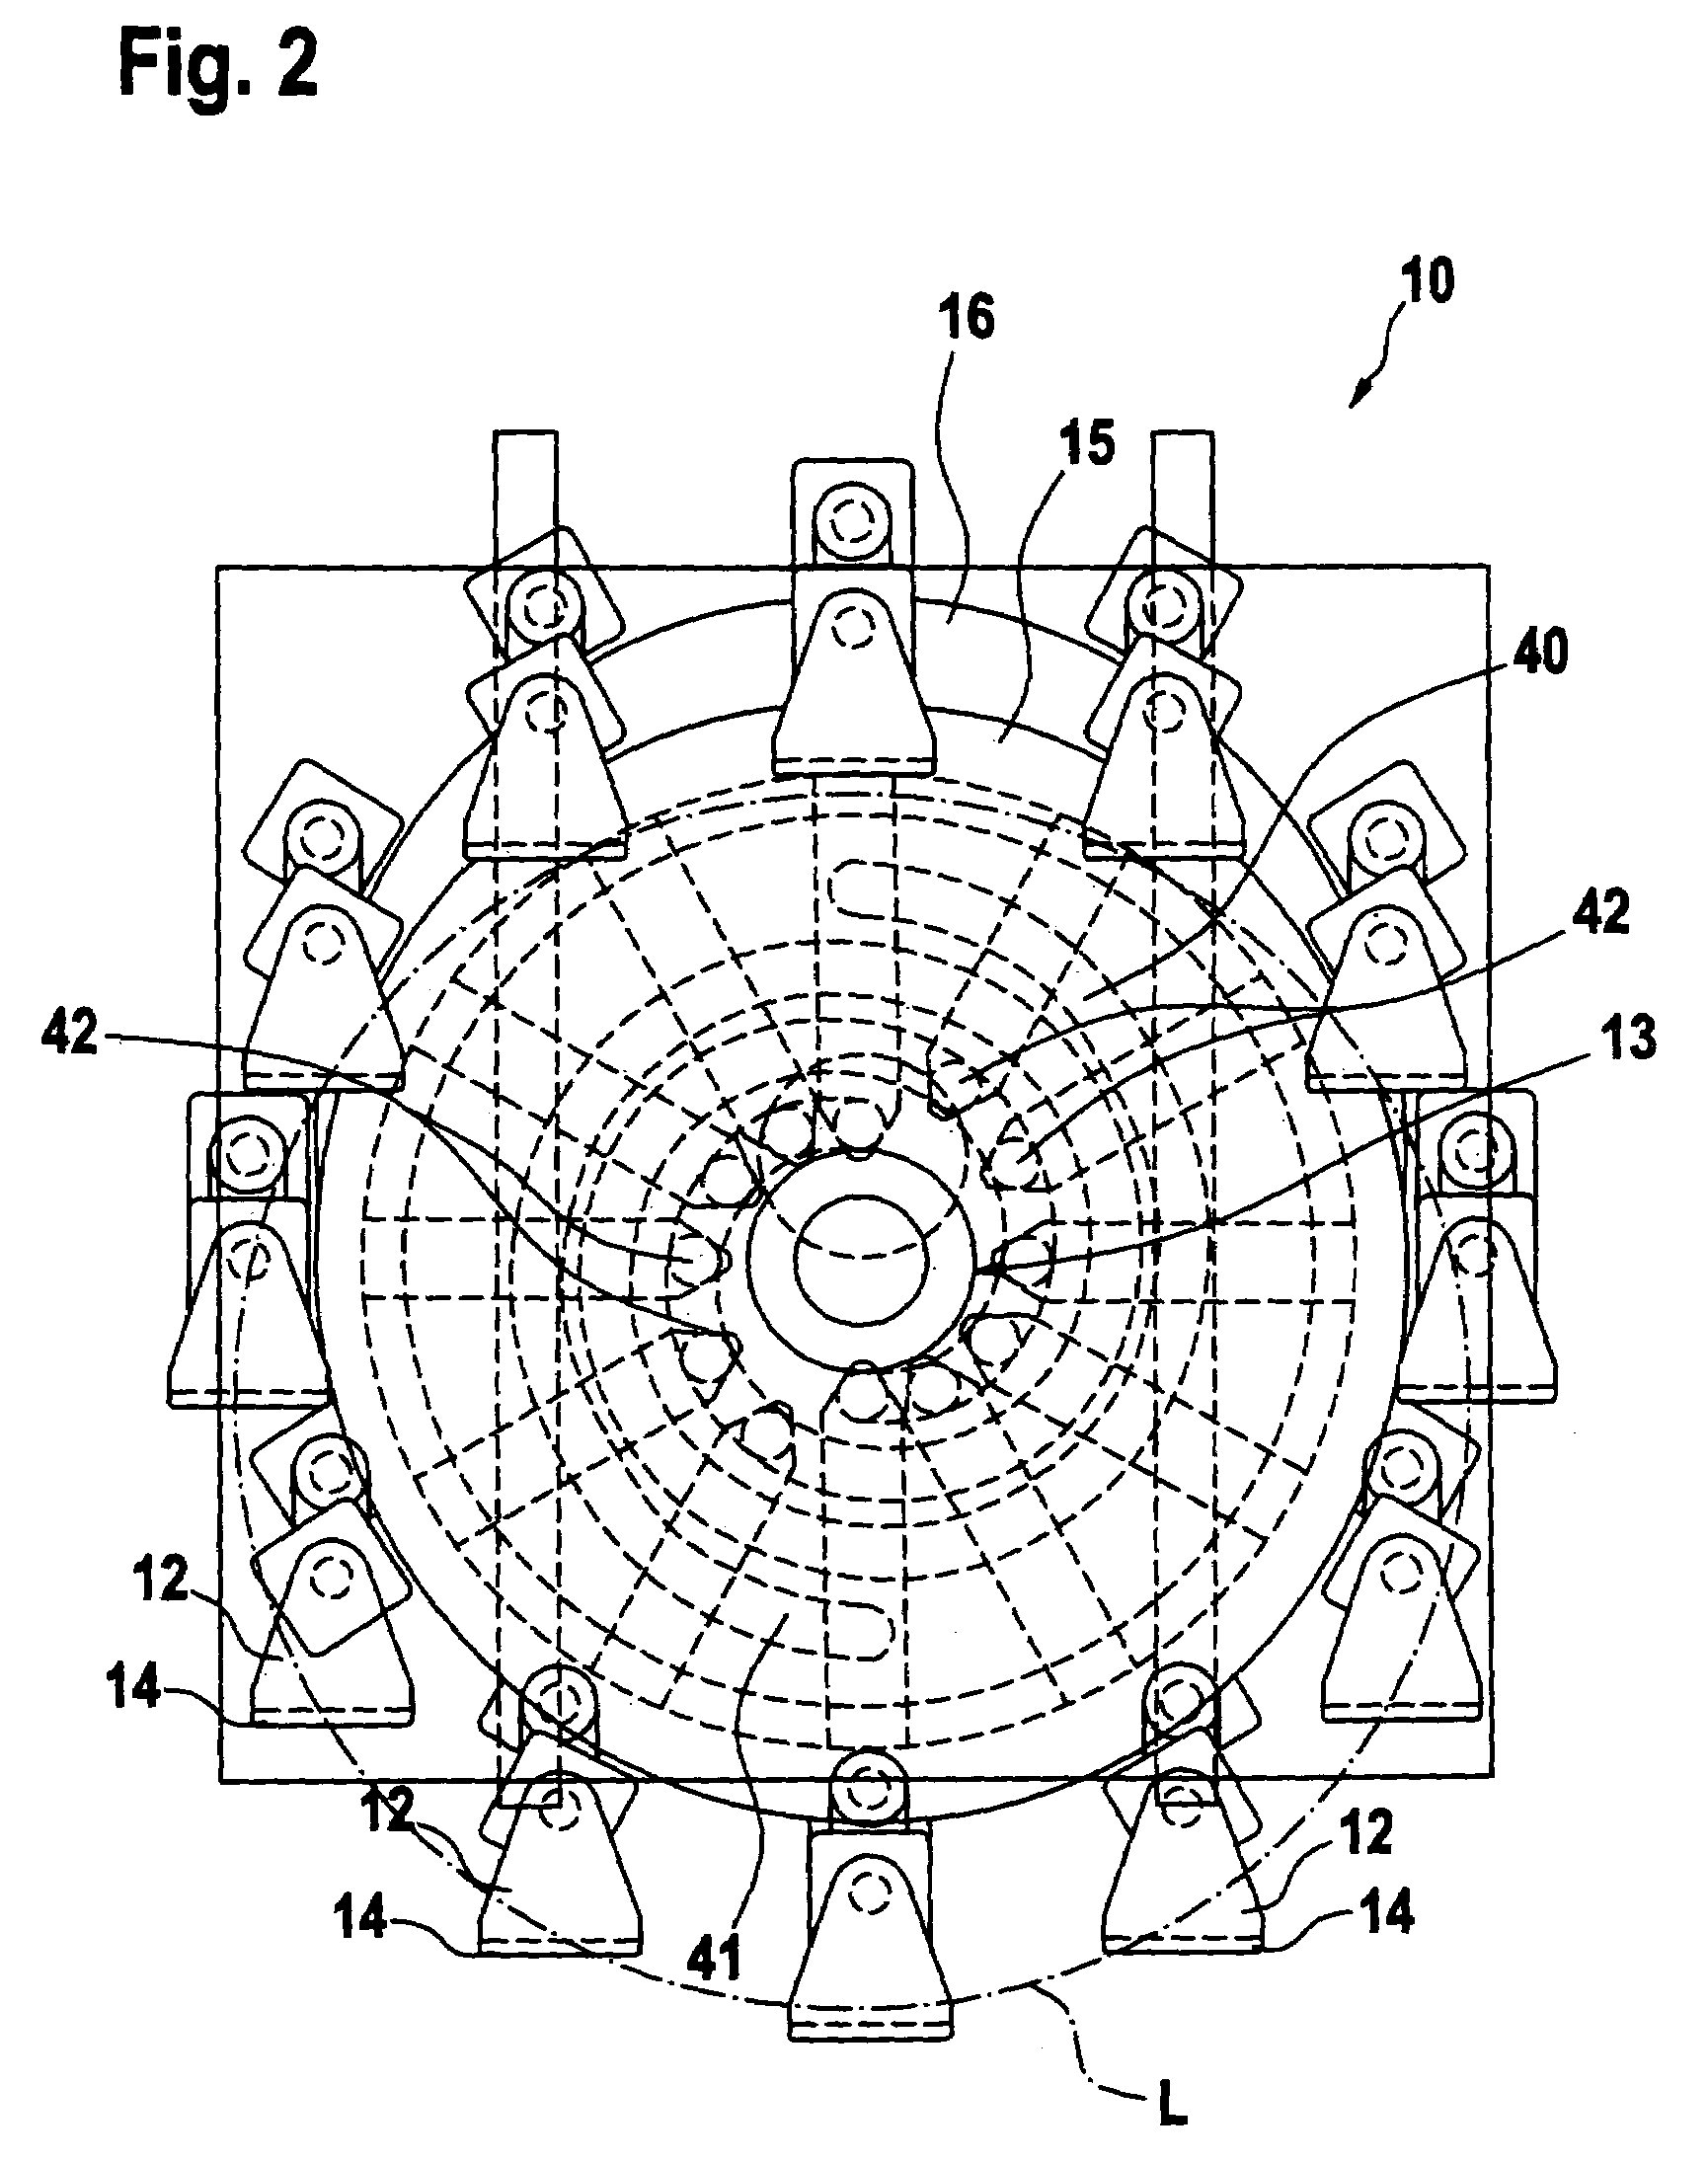 Apparatus for the transfer of rod-shaped articles